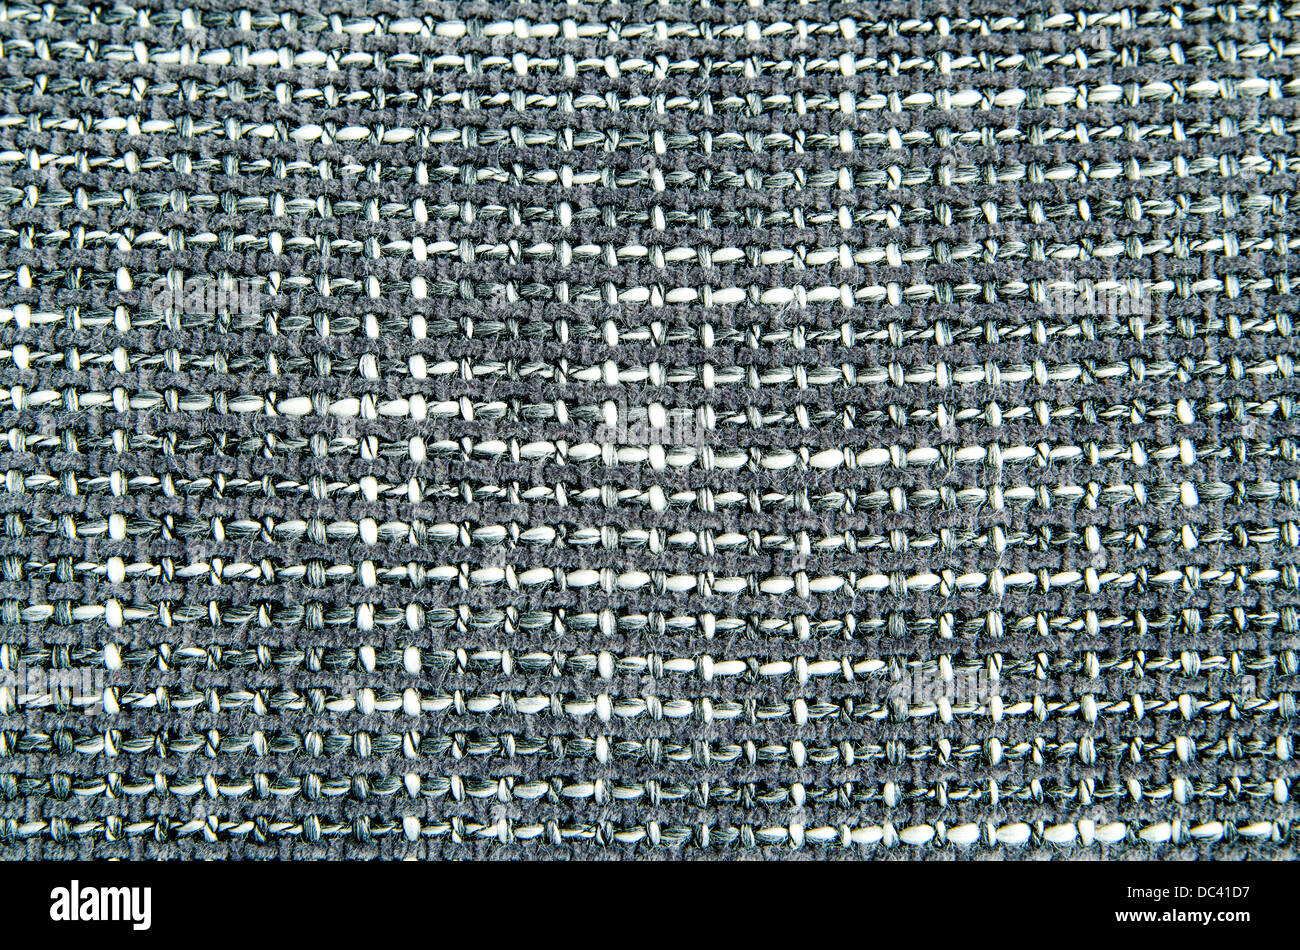 Linen texture close-up on a black and white piece of material Stock Photo